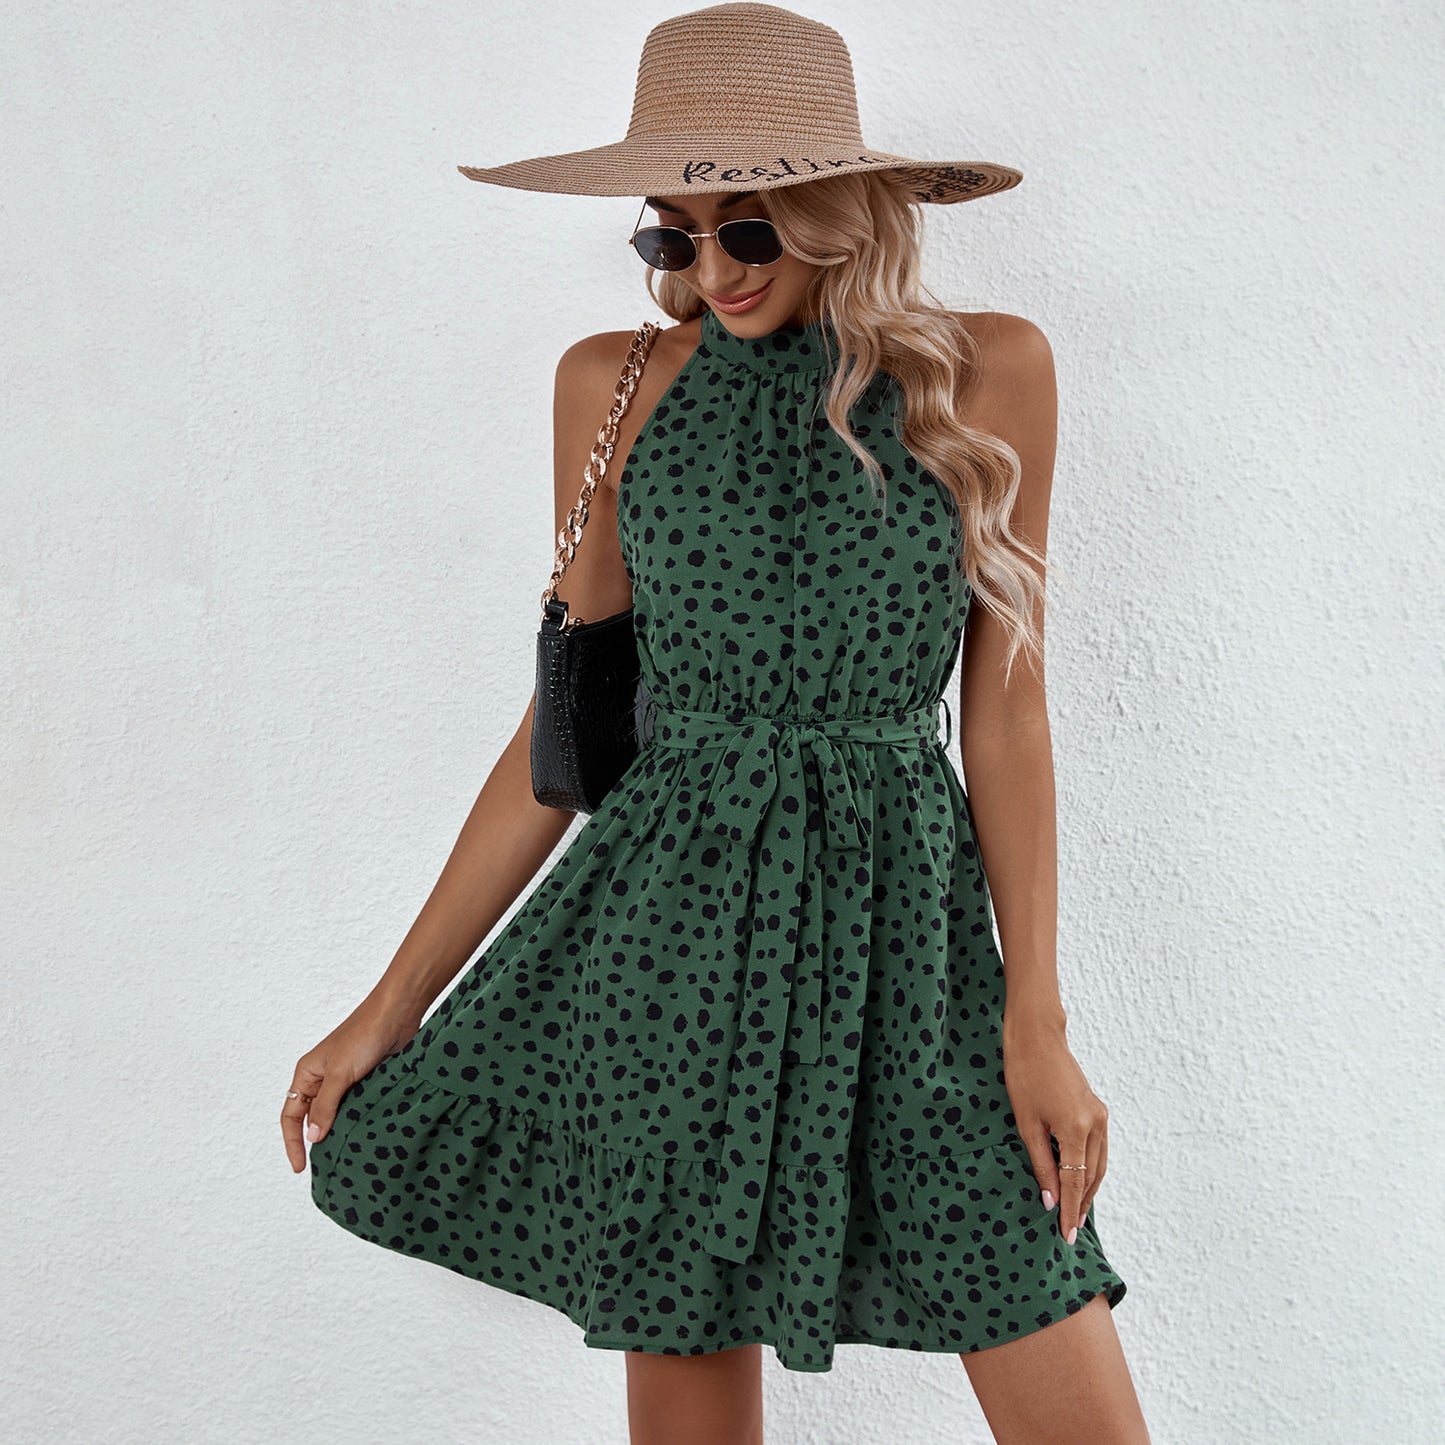 YESFASHION Women Clothing Halter Neck Small High-neck Floral Dress